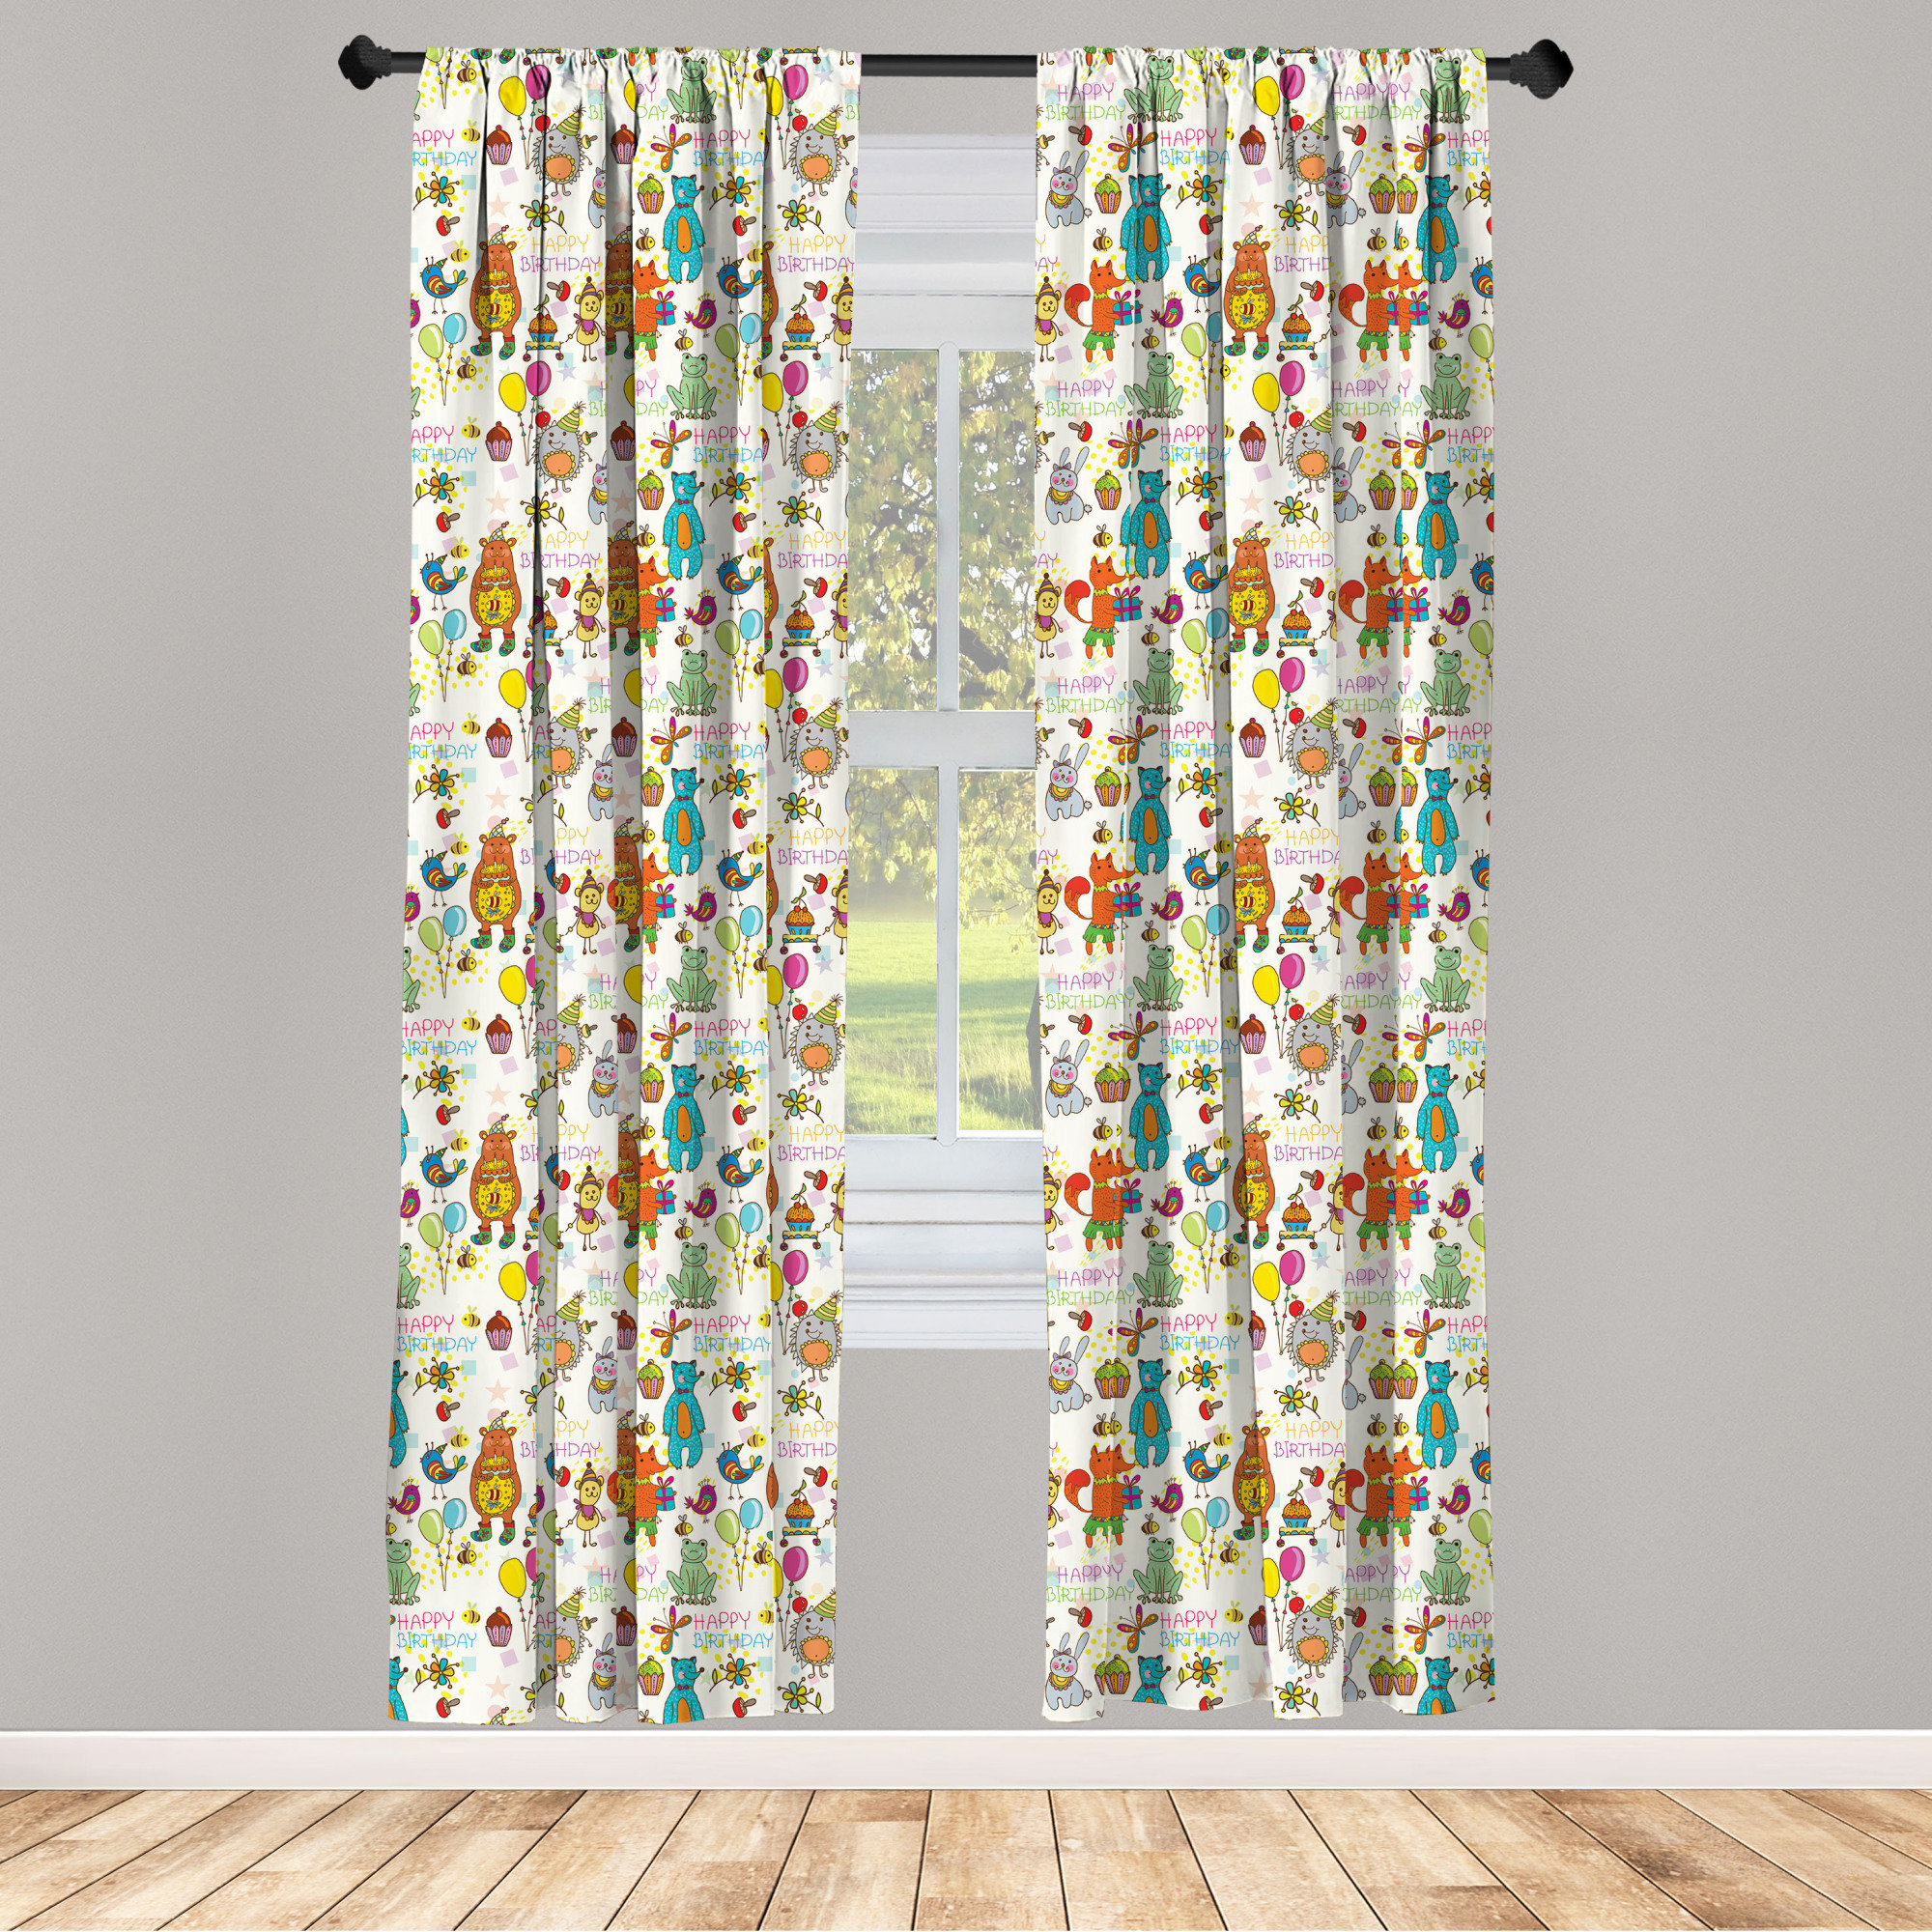 Window Drapes Home Decor Decorative Printed 2 Panel Set Curtains by Ambesonne 